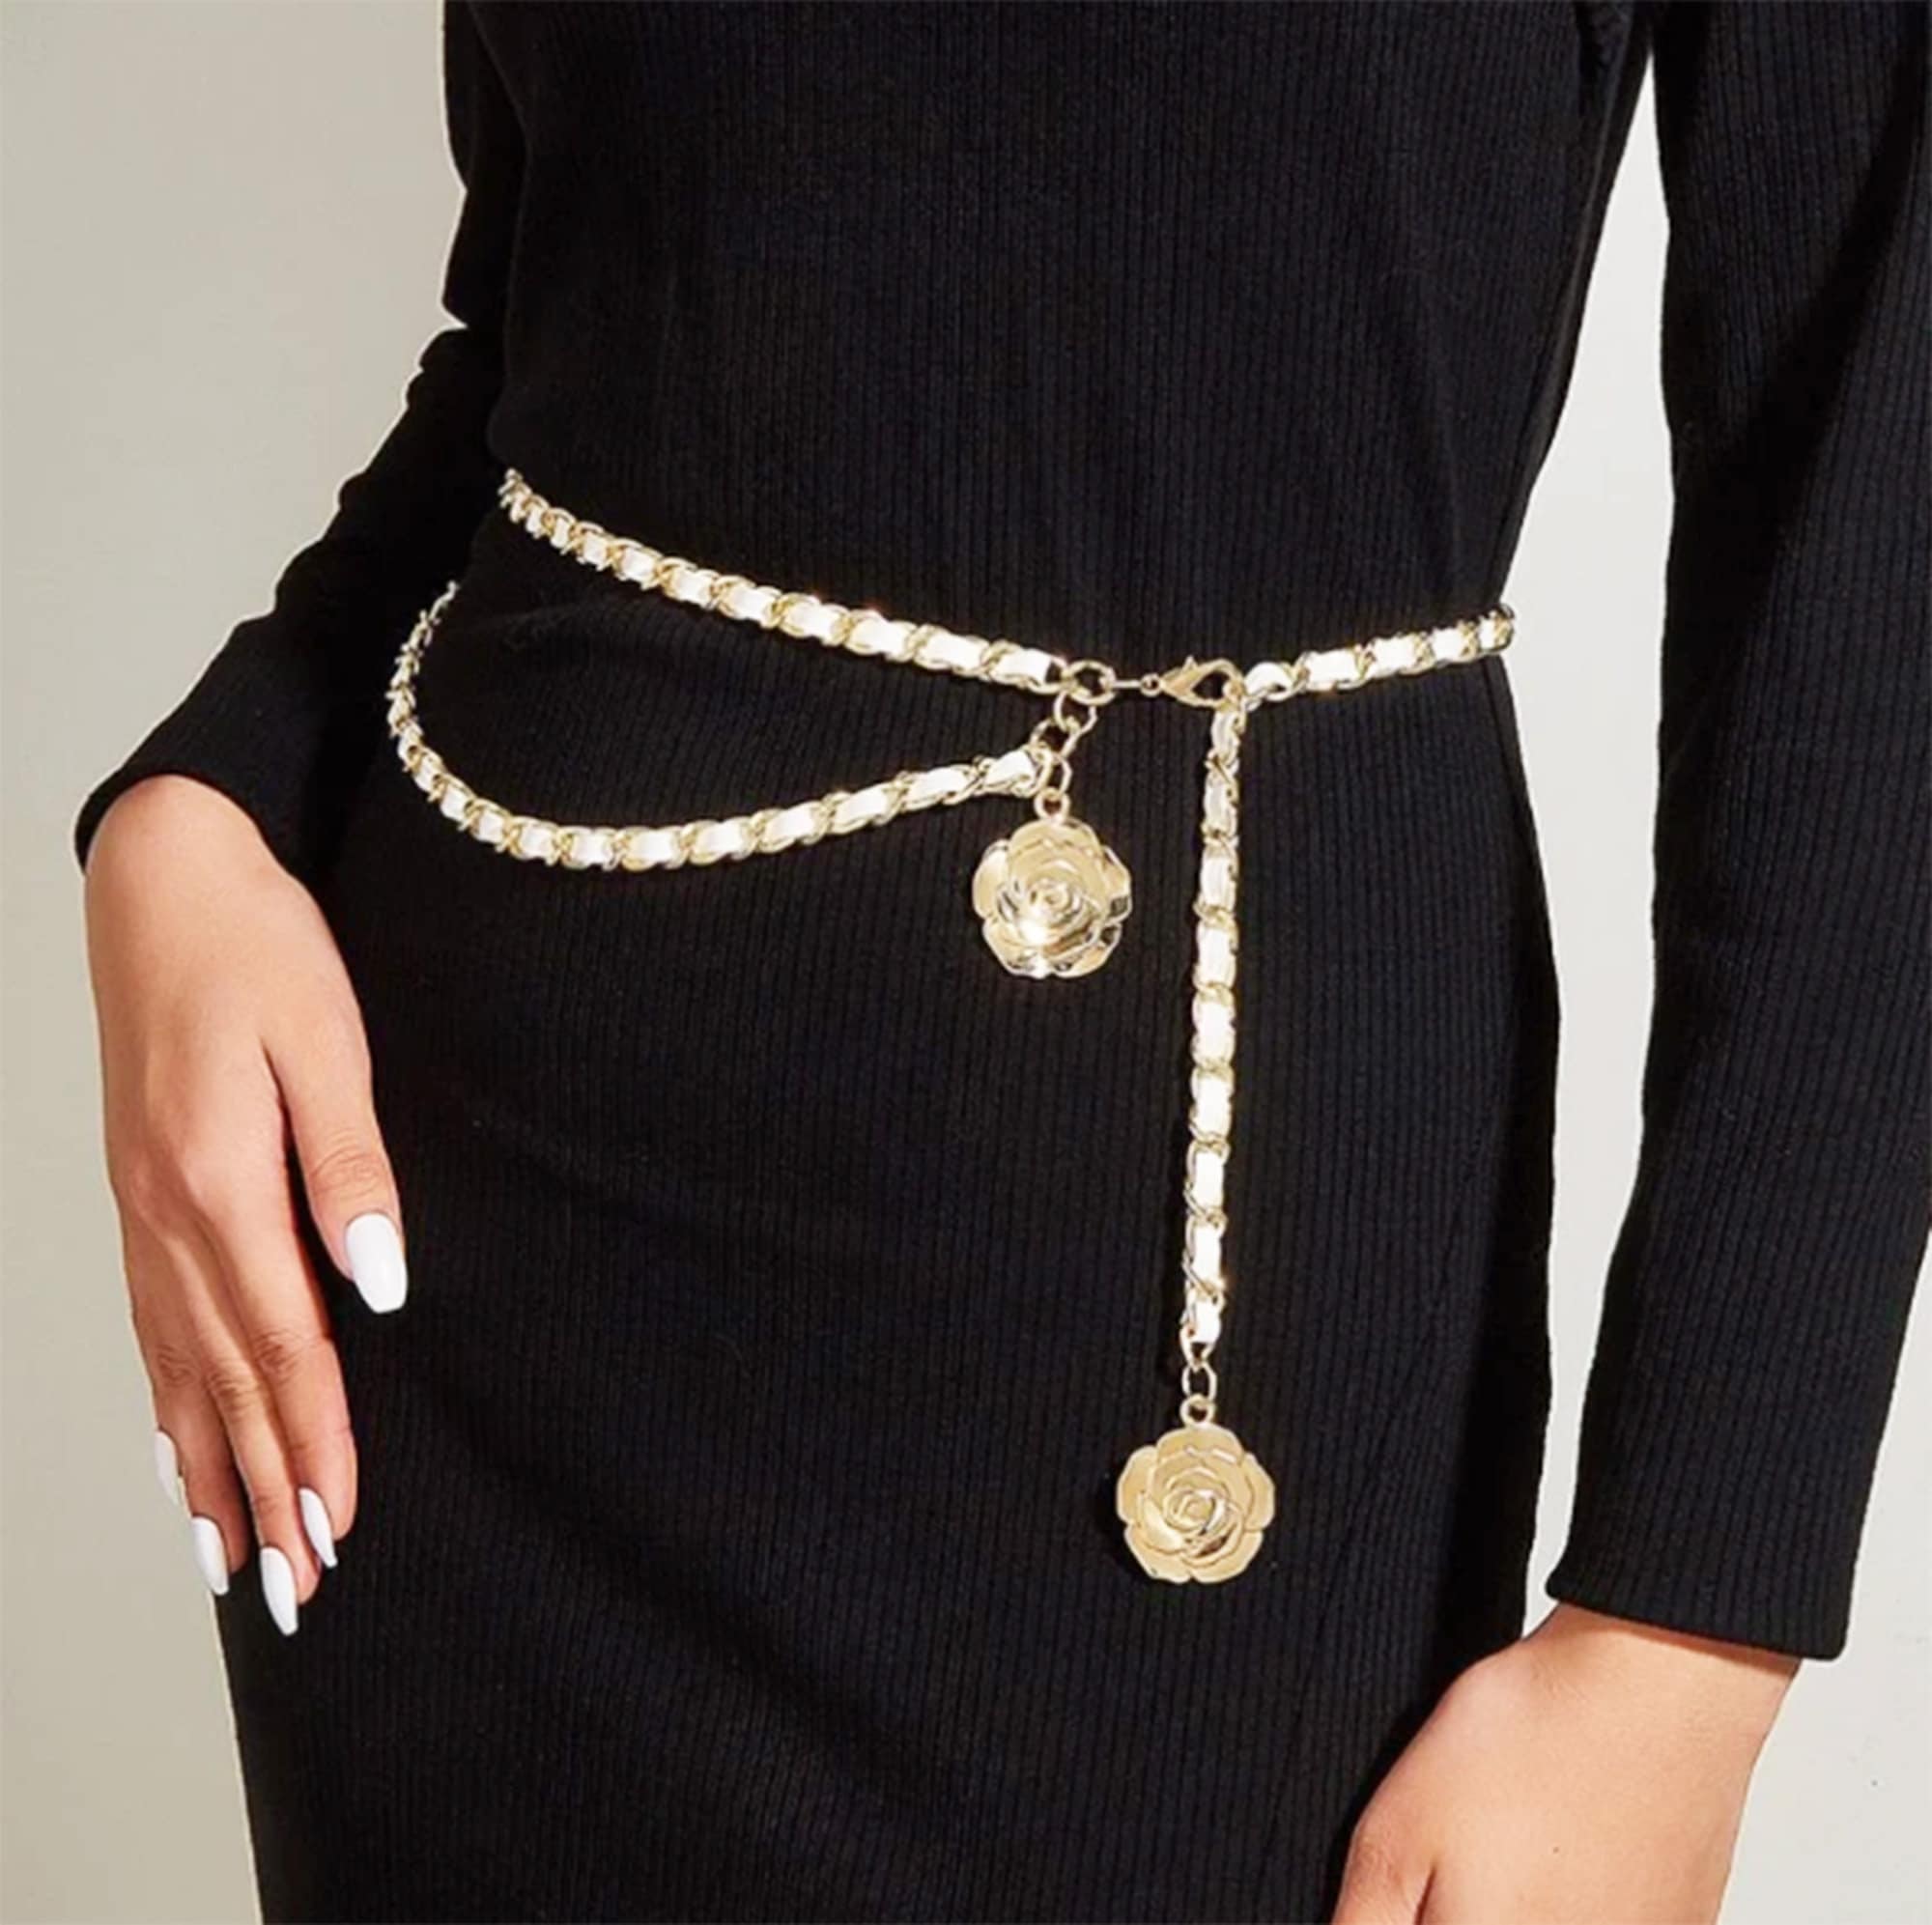 Chanel - Authenticated Belt - Chain Gold Plain for Women, Very Good Condition